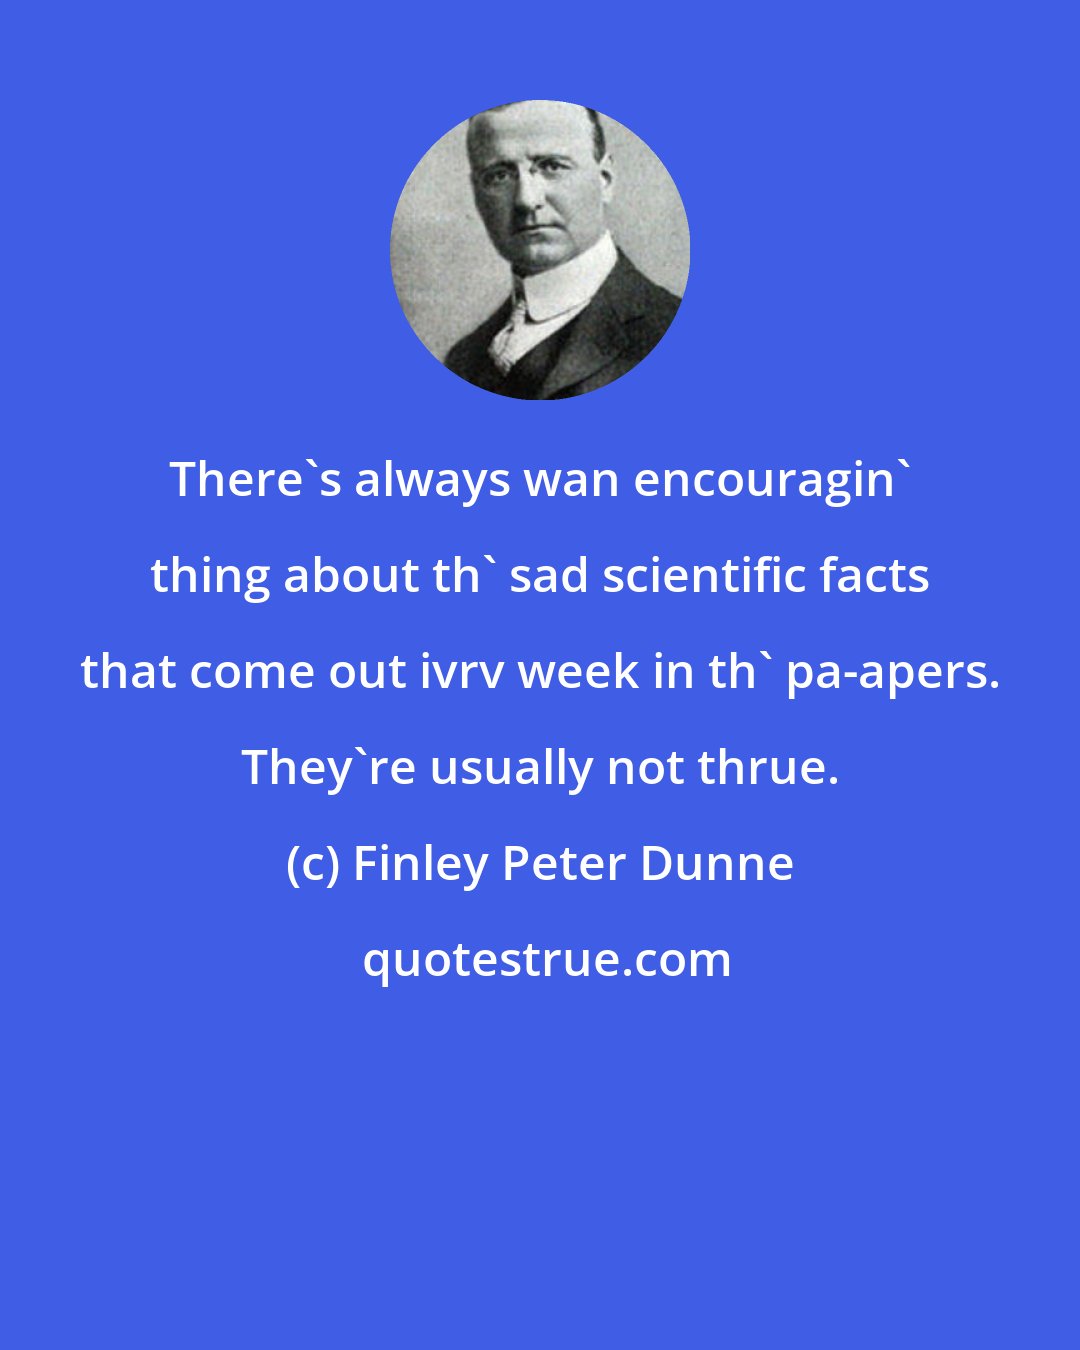 Finley Peter Dunne: There's always wan encouragin' thing about th' sad scientific facts that come out ivrv week in th' pa-apers. They're usually not thrue.